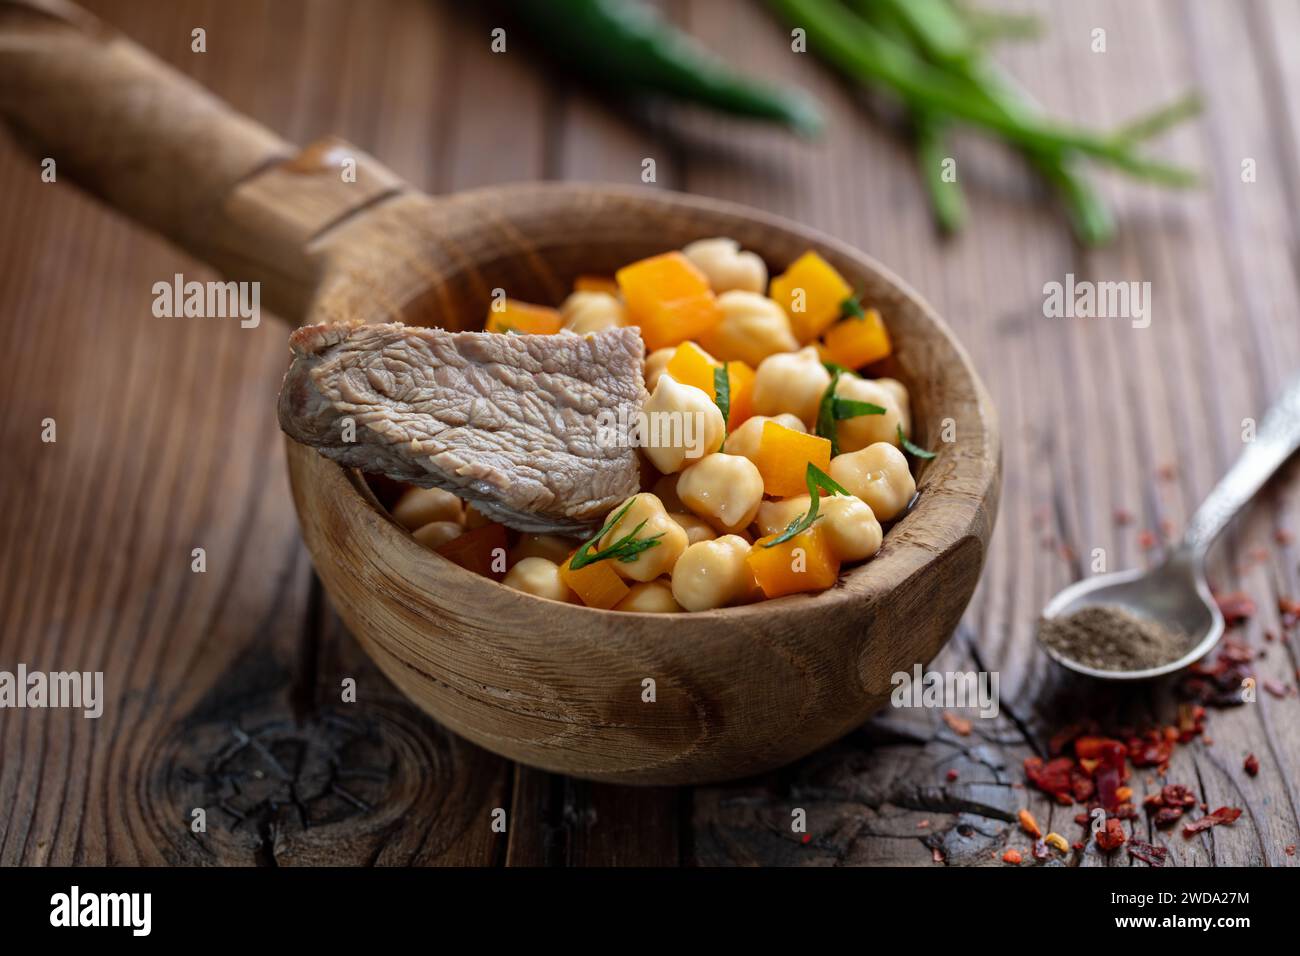 Central Asian food Nohatshurak soup with peas, vegetables and spices. Uzbek and Central Asia cuisine concept. Side view Stock Photo